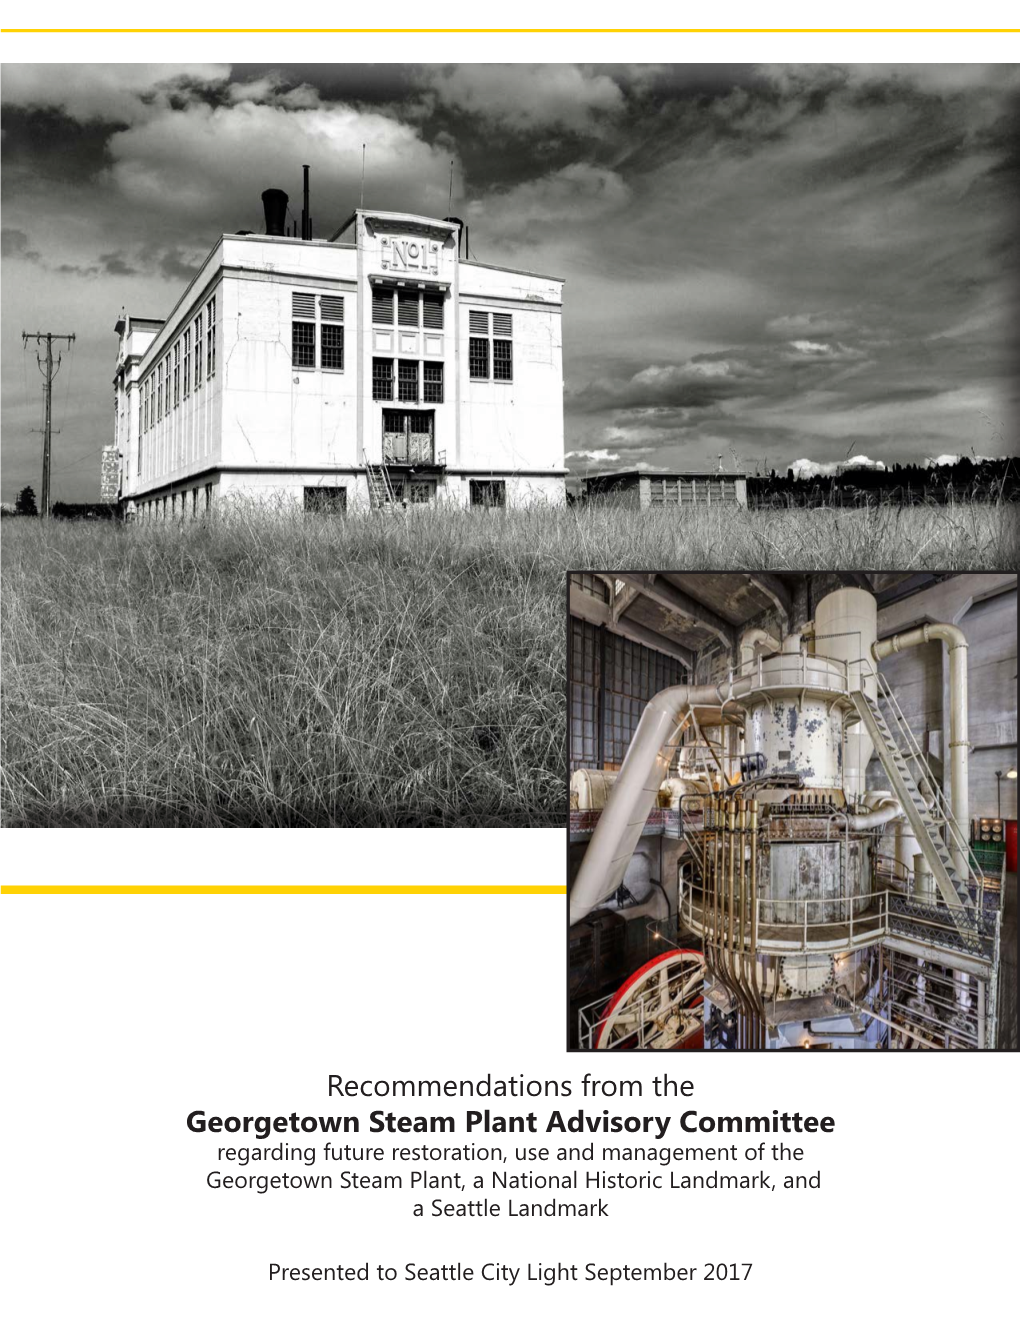 Recommendations from the Georgetown Steam Plant Advisory